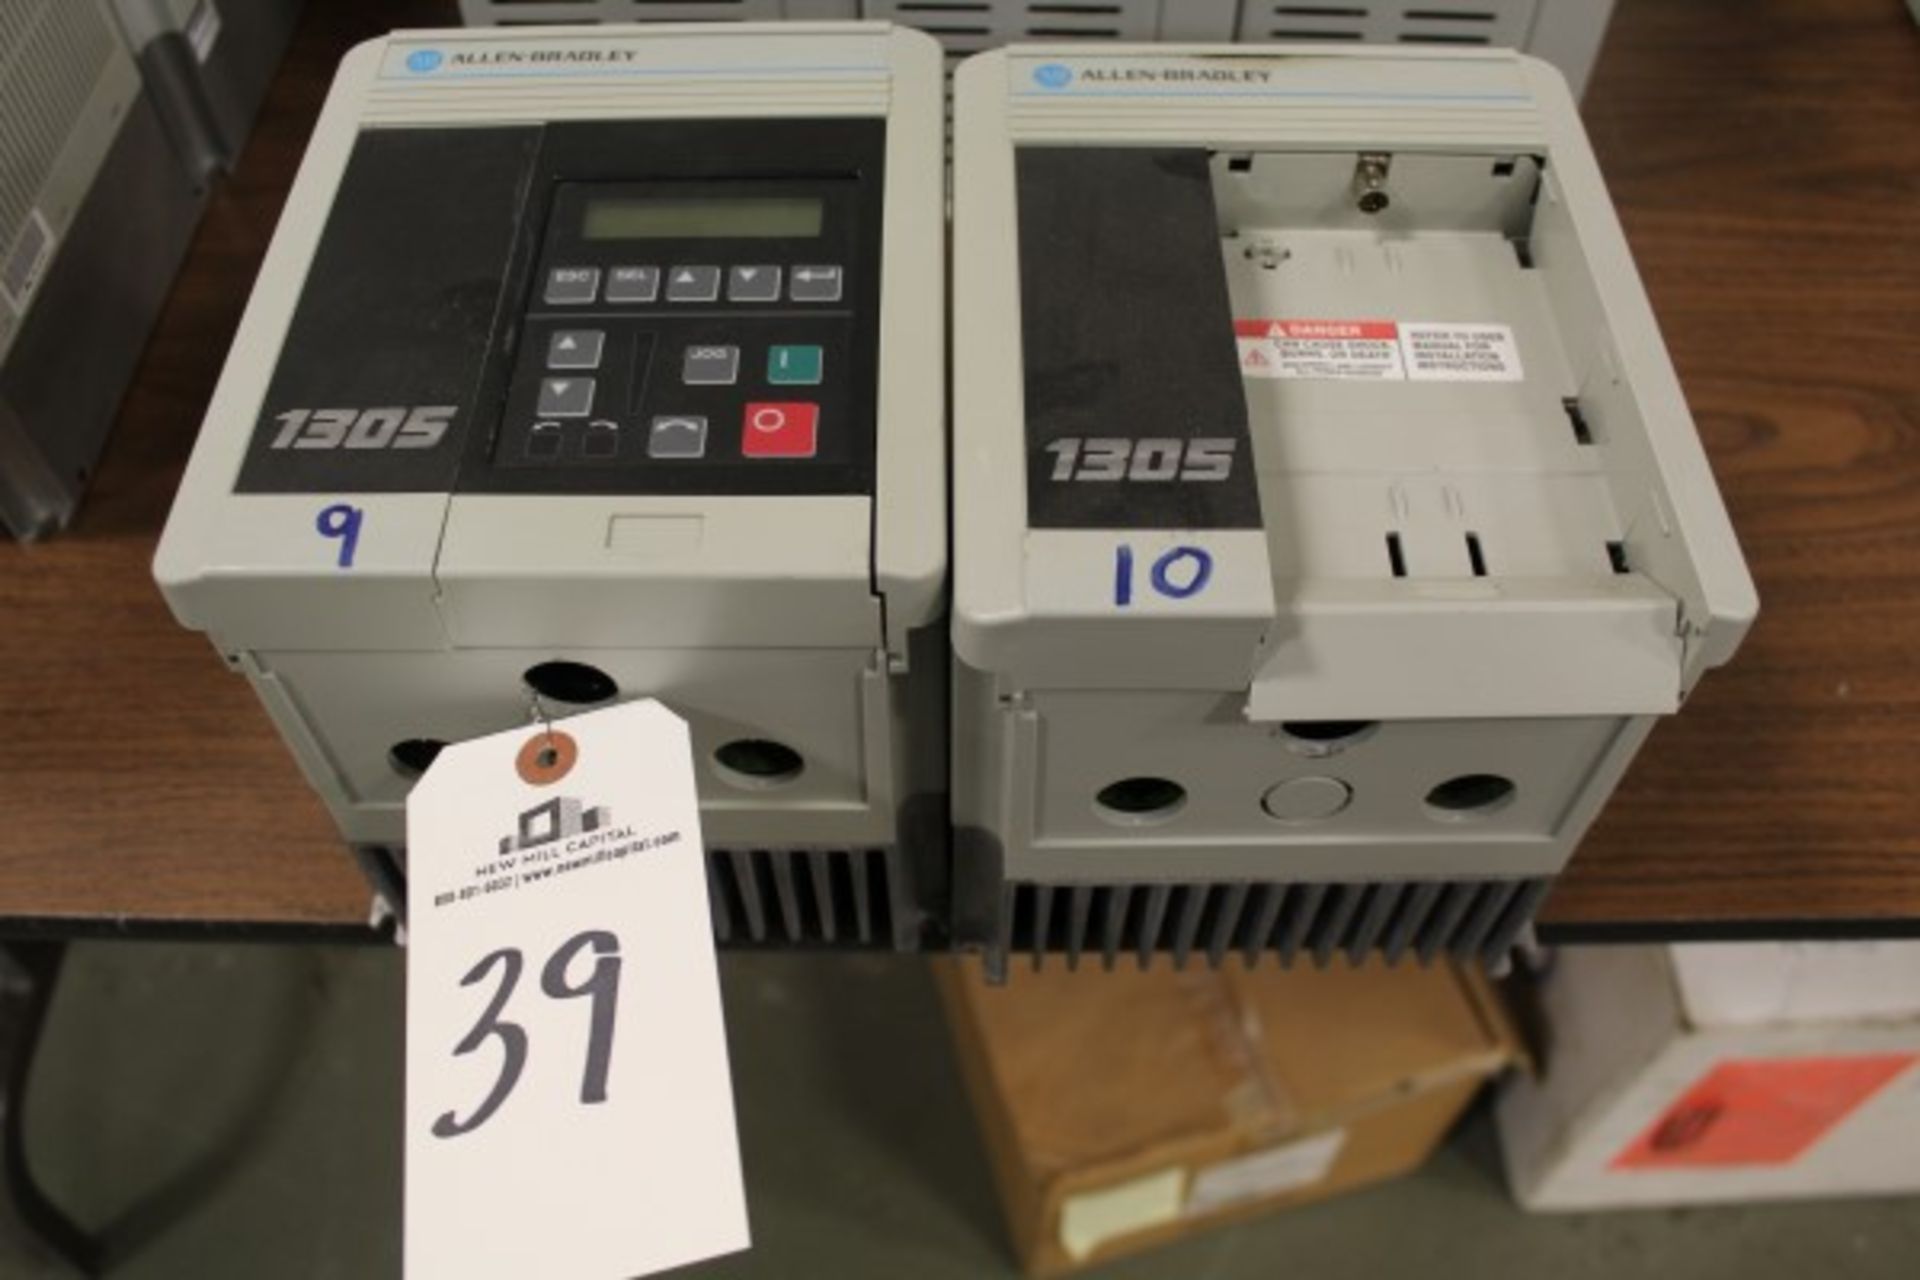 Lot of (2) Allen Bradley 1305 AC Drives | Location: Cookie Line | Rigging Price: Buyer May Hand